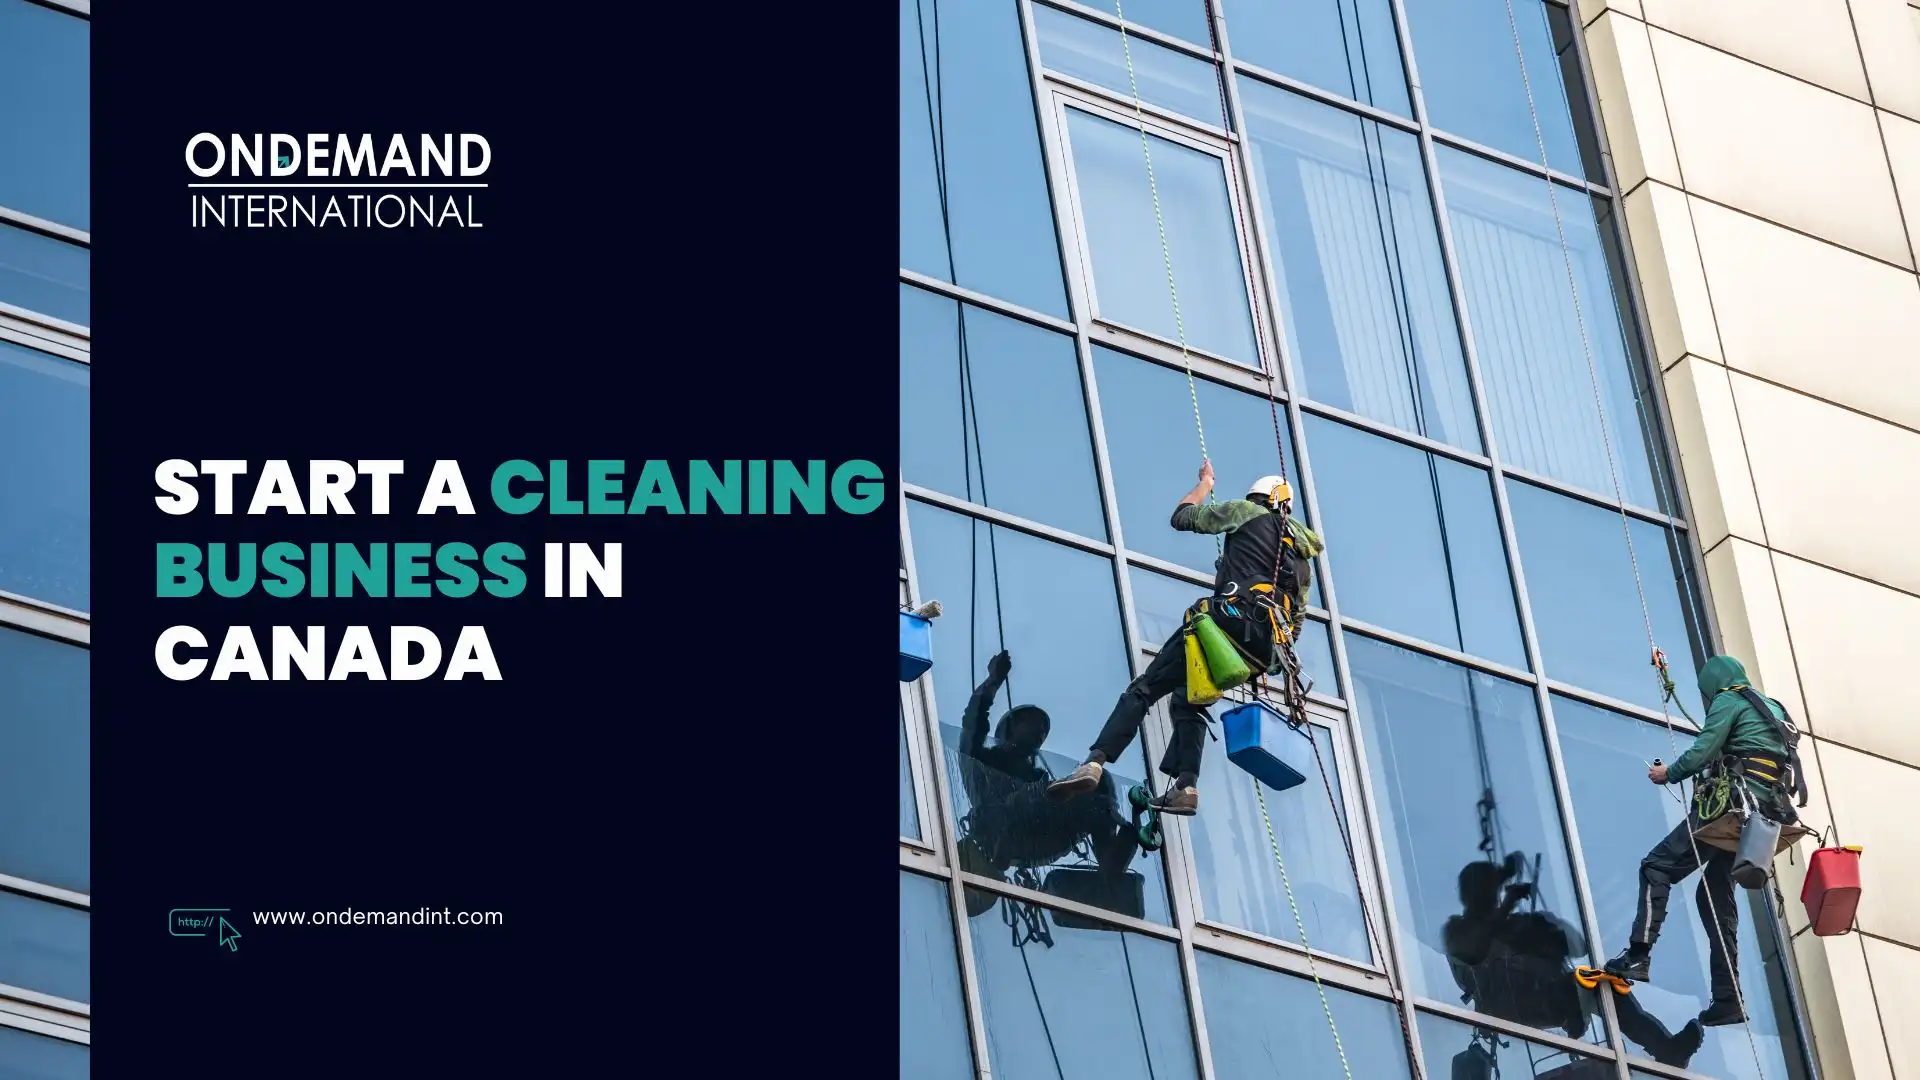 Start a Cleaning Business in Canada